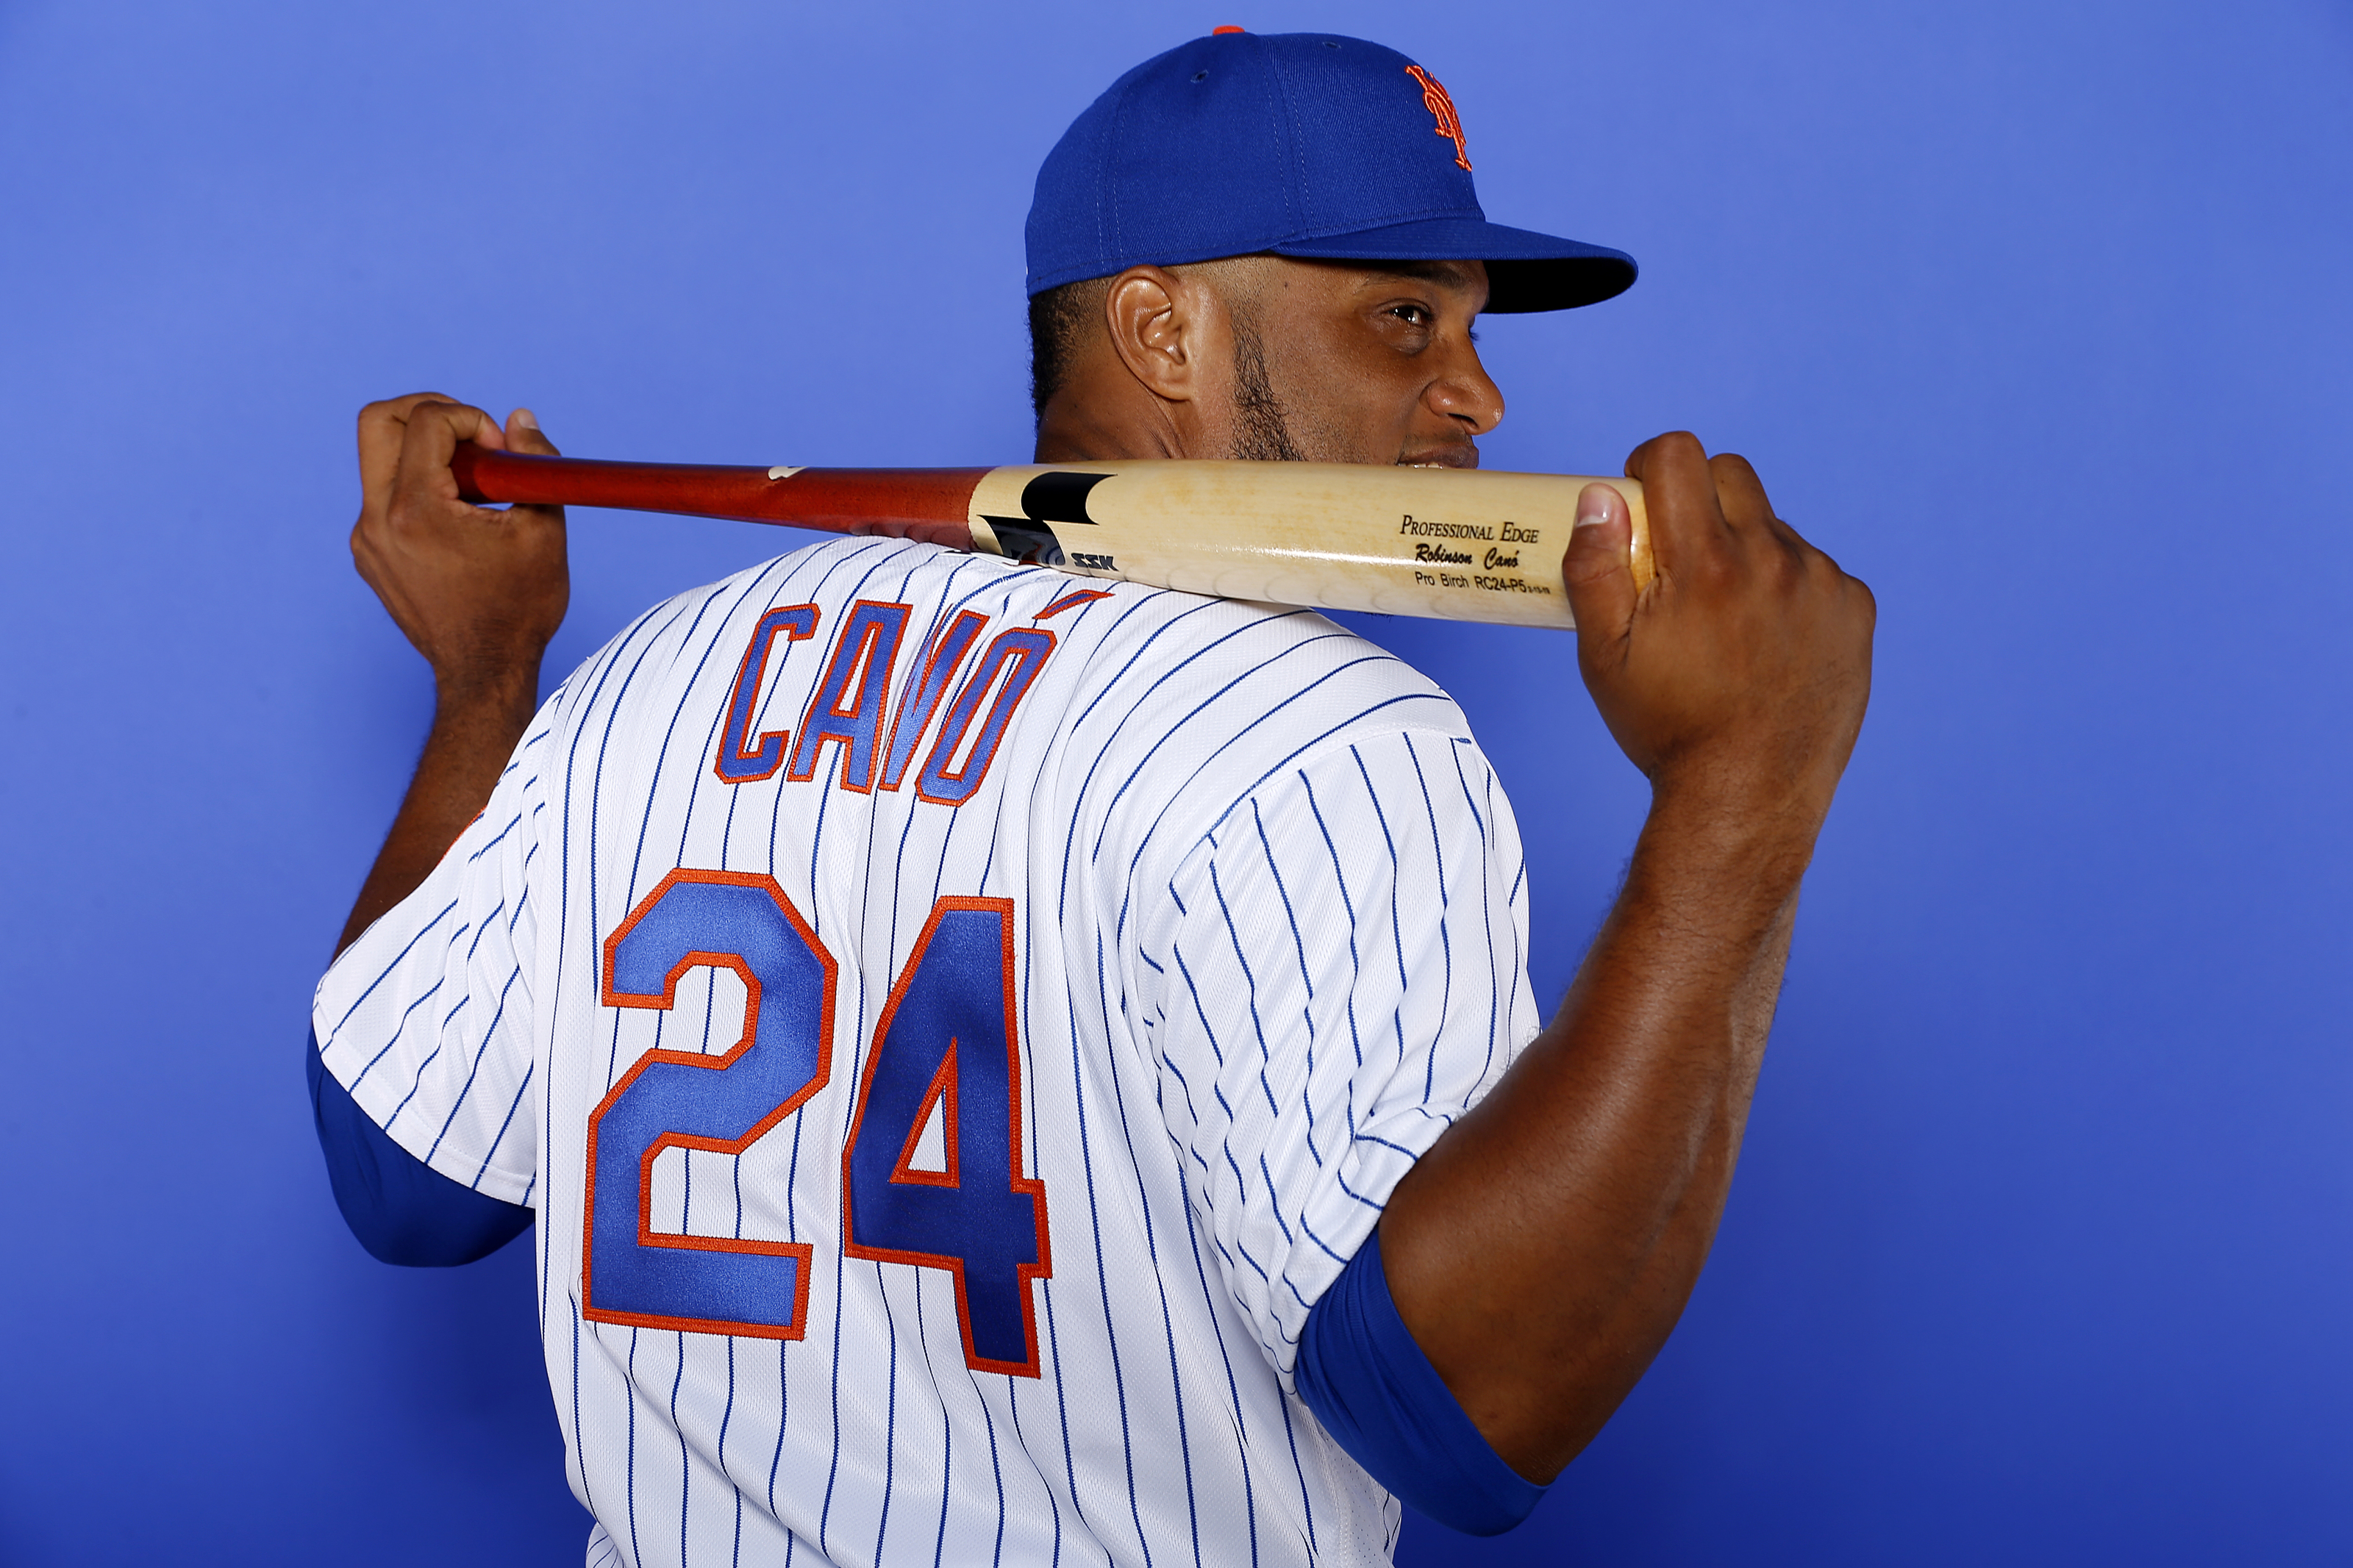 Should Robinson Cano even be in the Mets lineup: Sherman